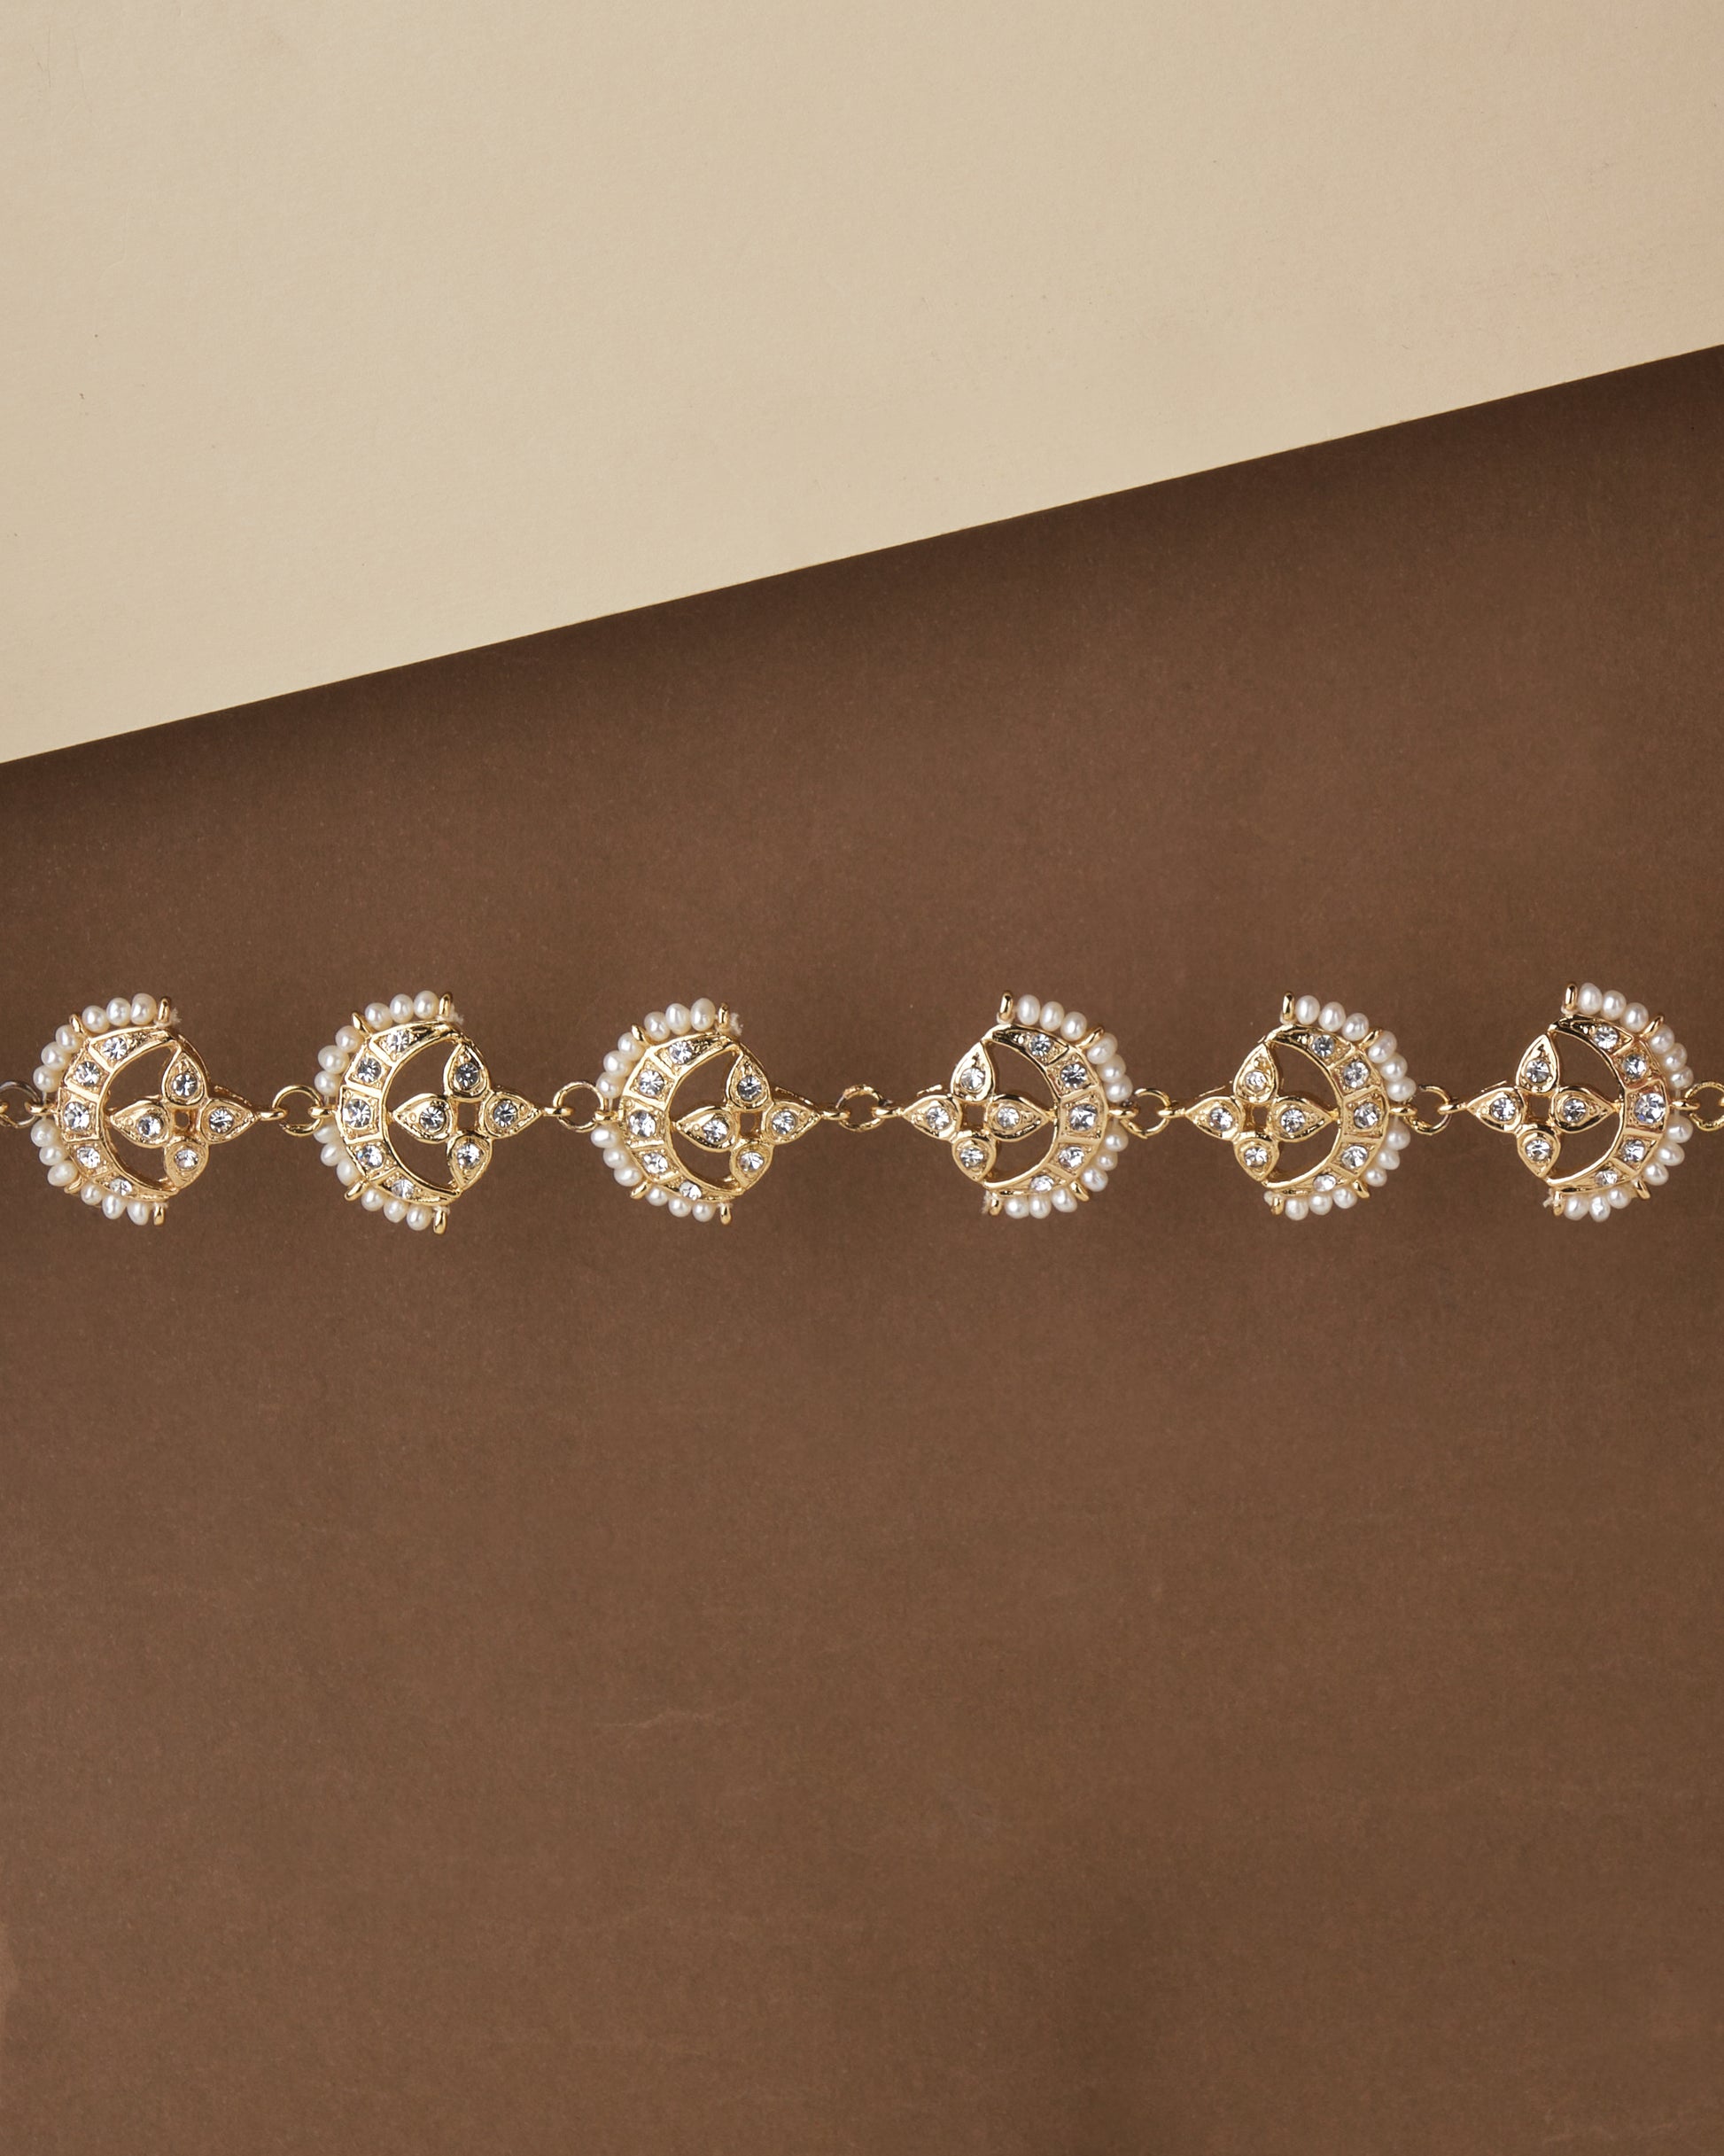 The Nereida Necklet Necklace with pearl accents displayed on a two-tone background by Chandrani Pearls.